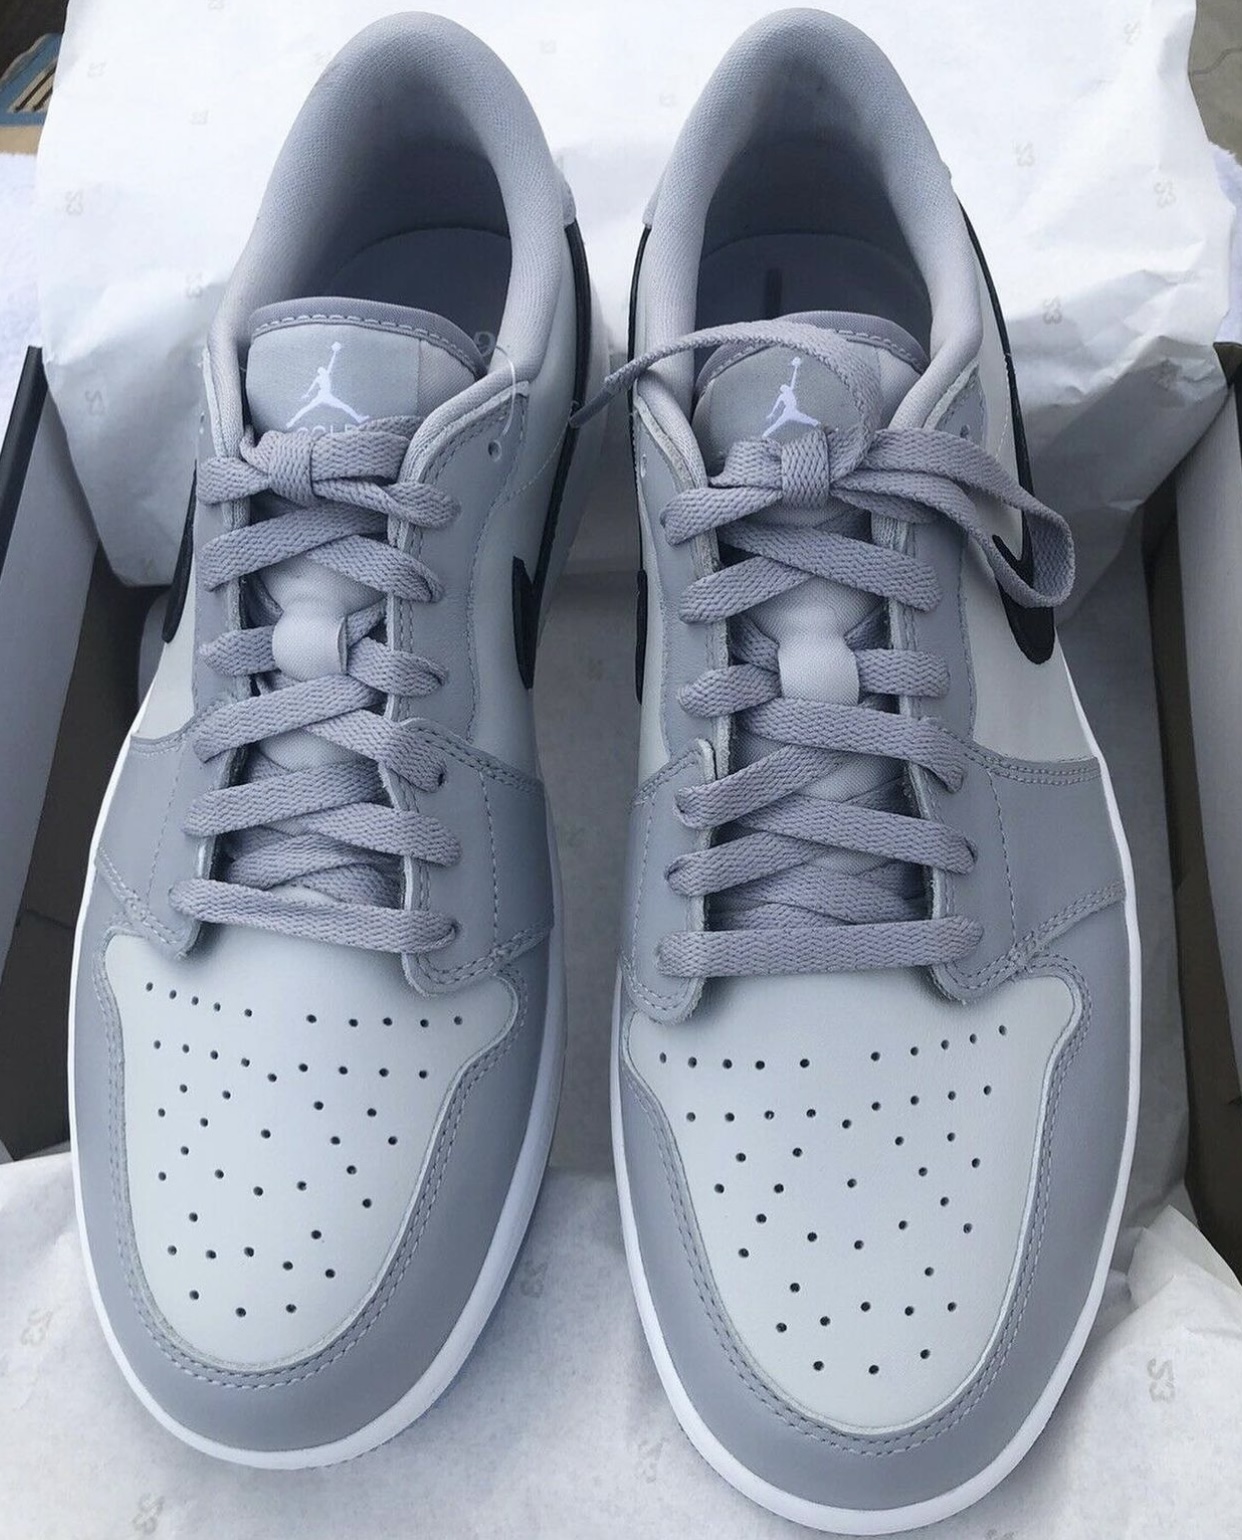 for jordan 1 low wolf grey more updates on the newly Green Glow Jordan Super Fly 2 - SBD